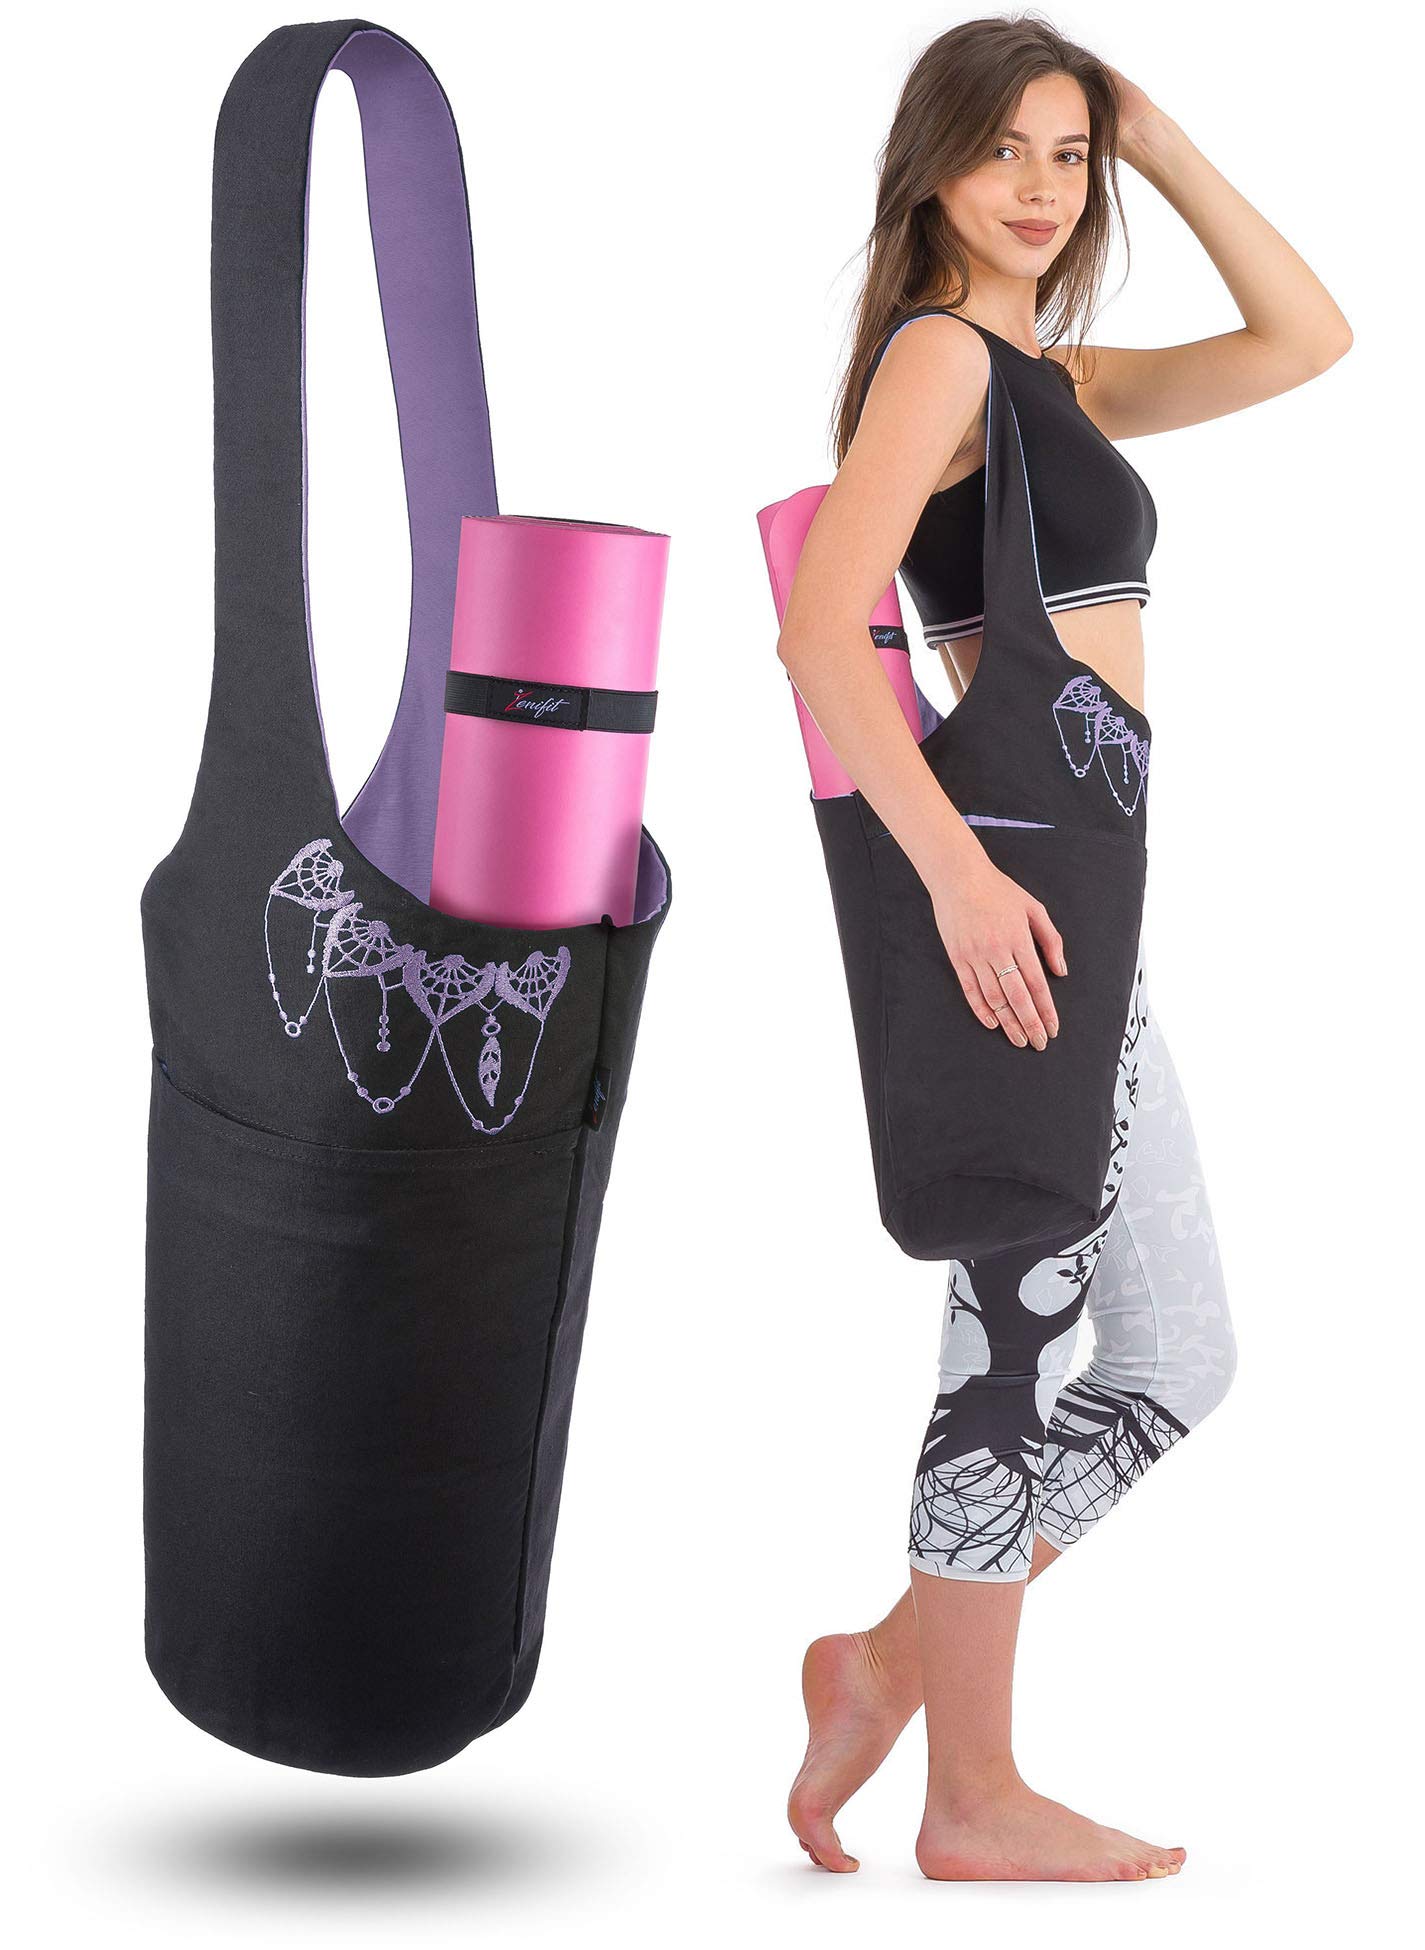 Zenifit Yoga Mat Bag - Long Tote with Pockets - Holds More Yoga